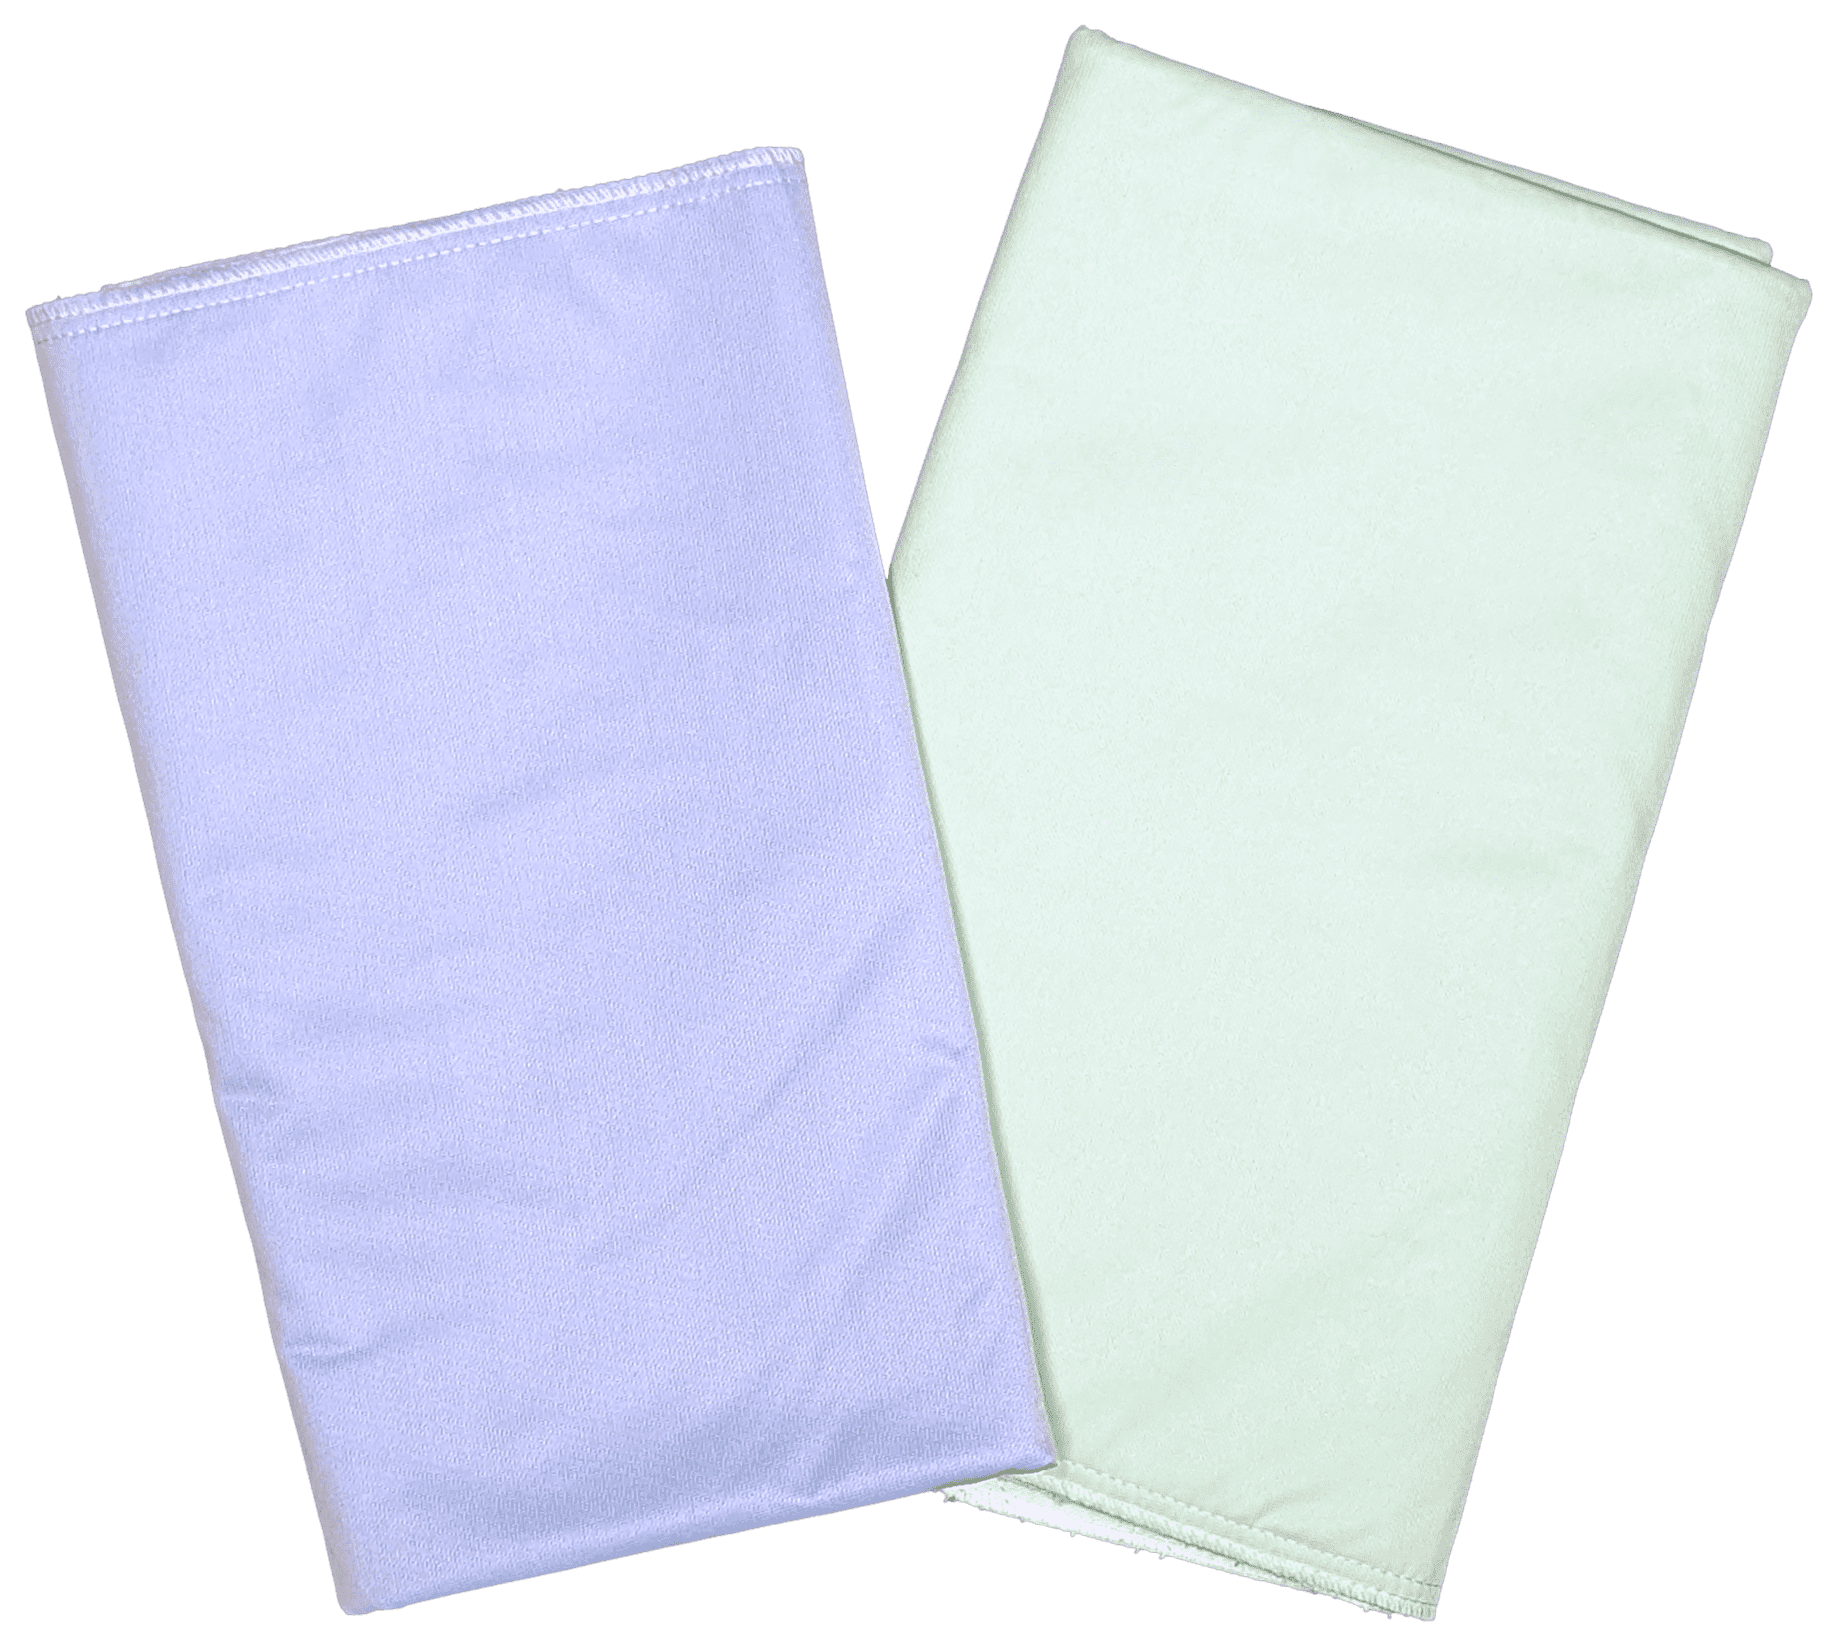 Careoutfit Washable Bed Pads/Reusable Incontinence Underpads 24x36-4 Pack - Blue, Green, Tan and Pink - Ideal for Children and Adults Wholesale